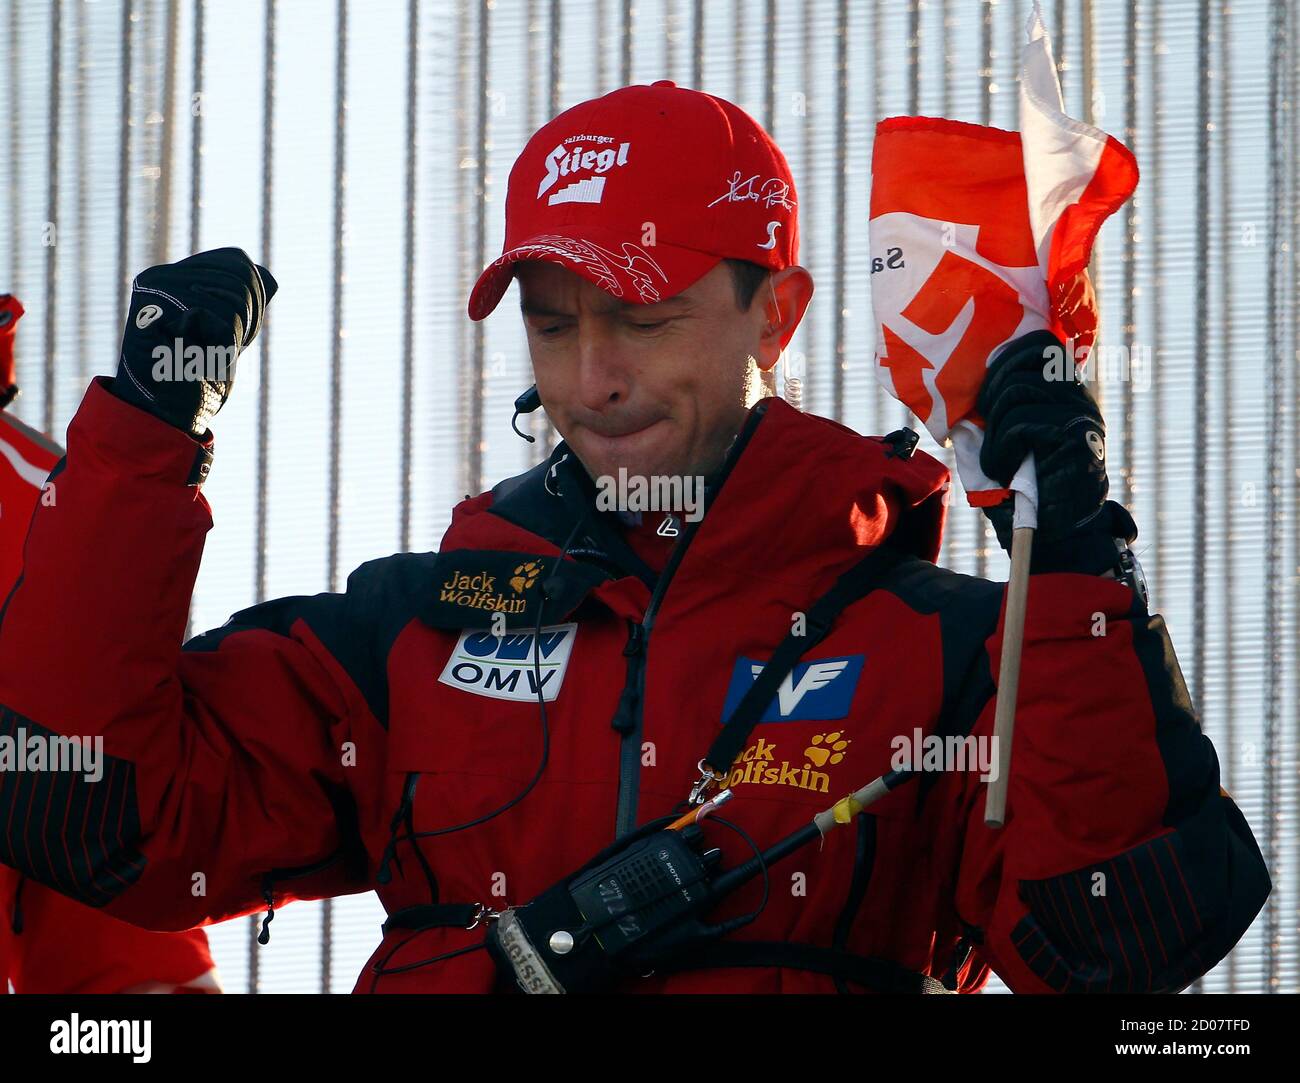 Austria's head coach Alexander Pointner celebrates during the ski jumping  normal hill team final at the Nordic World Ski Championships in Oslo March  5, 2011. REUTERS/Michael Dalder (NORWAY - Tags: SPORT SKIING